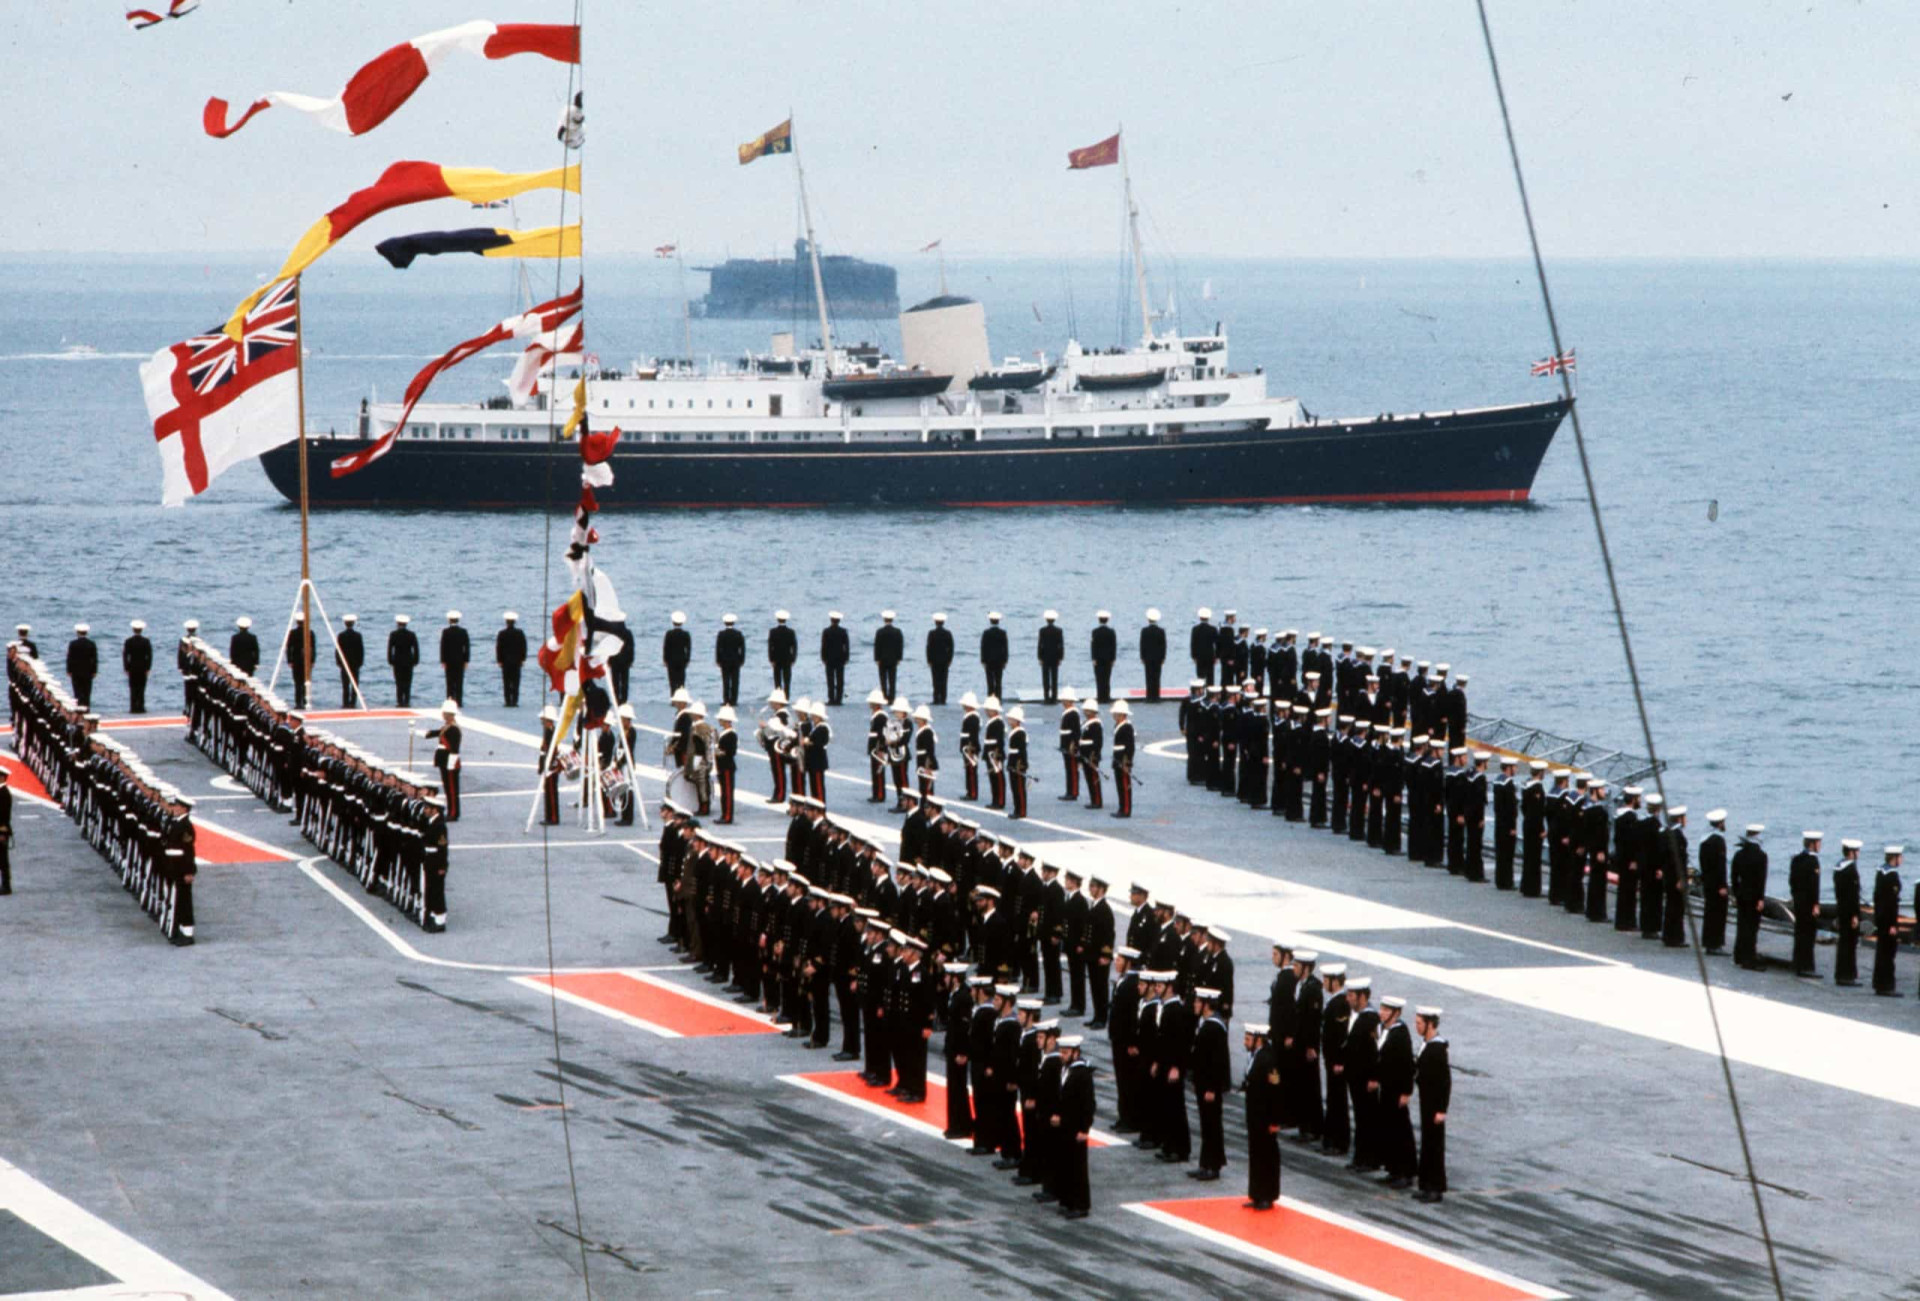 <p>The Silver Jubilee of Queen Elizabeth II in 1977 marked the 25th anniversary of the monarch's accession to the British throne. Among the series of year-long events was the Silver Jubilee Review of the Fleet at Spithead, off Portsmouth in southern England. <em>Britannia</em> sailed past dozens of Royal Navy vessels anchored in the Solent on June 28, 1977.</p><p>You may also like:<a href="https://www.starsinsider.com/n/349594?utm_source=msn.com&utm_medium=display&utm_campaign=referral_description&utm_content=474709v1en-us"> Celebrity siblings that fame forgot</a></p>